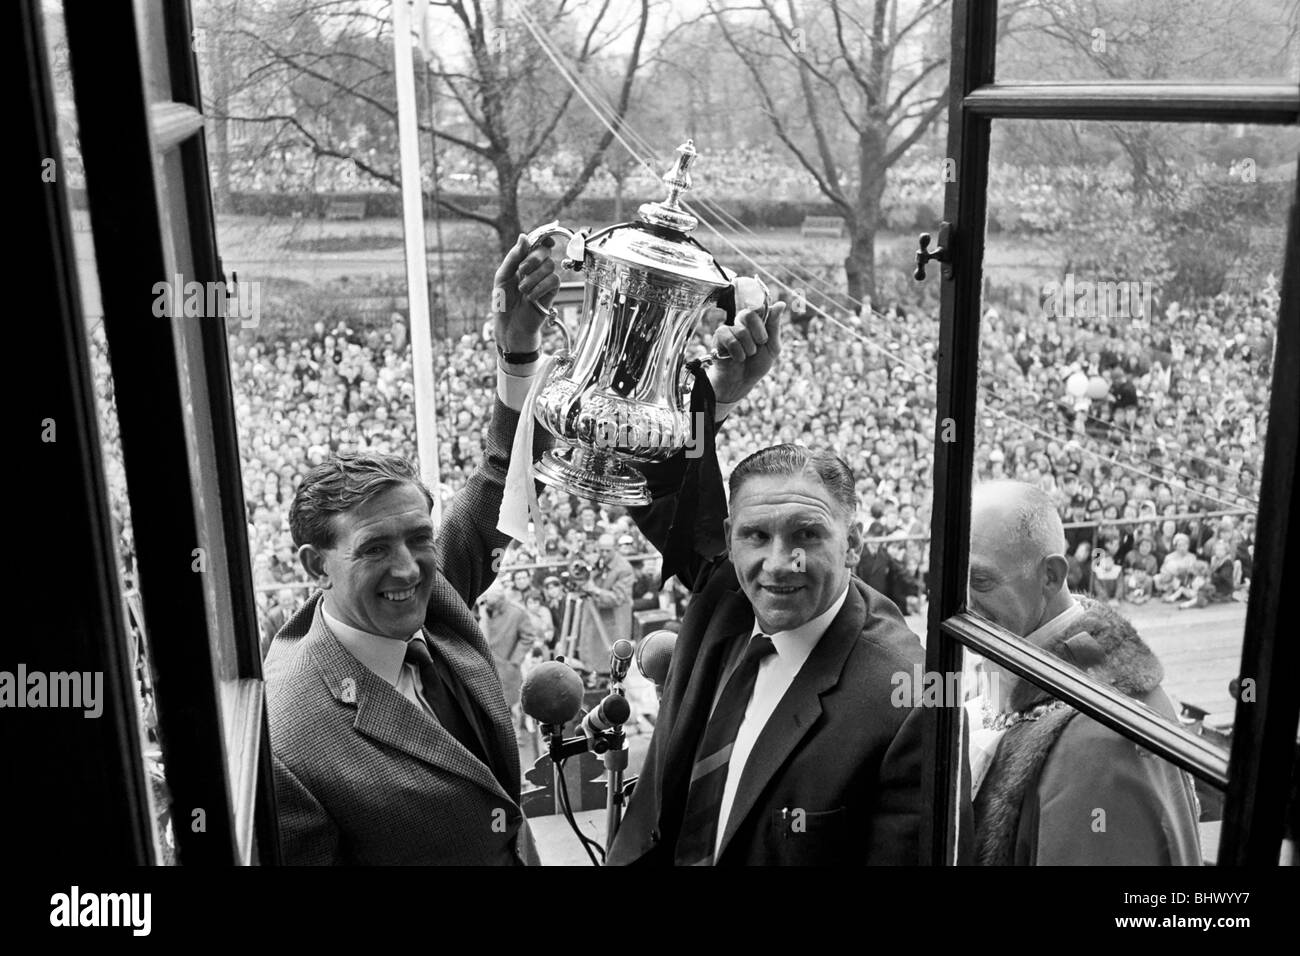 Tottenham Hotspur players parade the FA Cup trophy from the top of an open top double decker bus to thousands of fans gathered Stock Photo